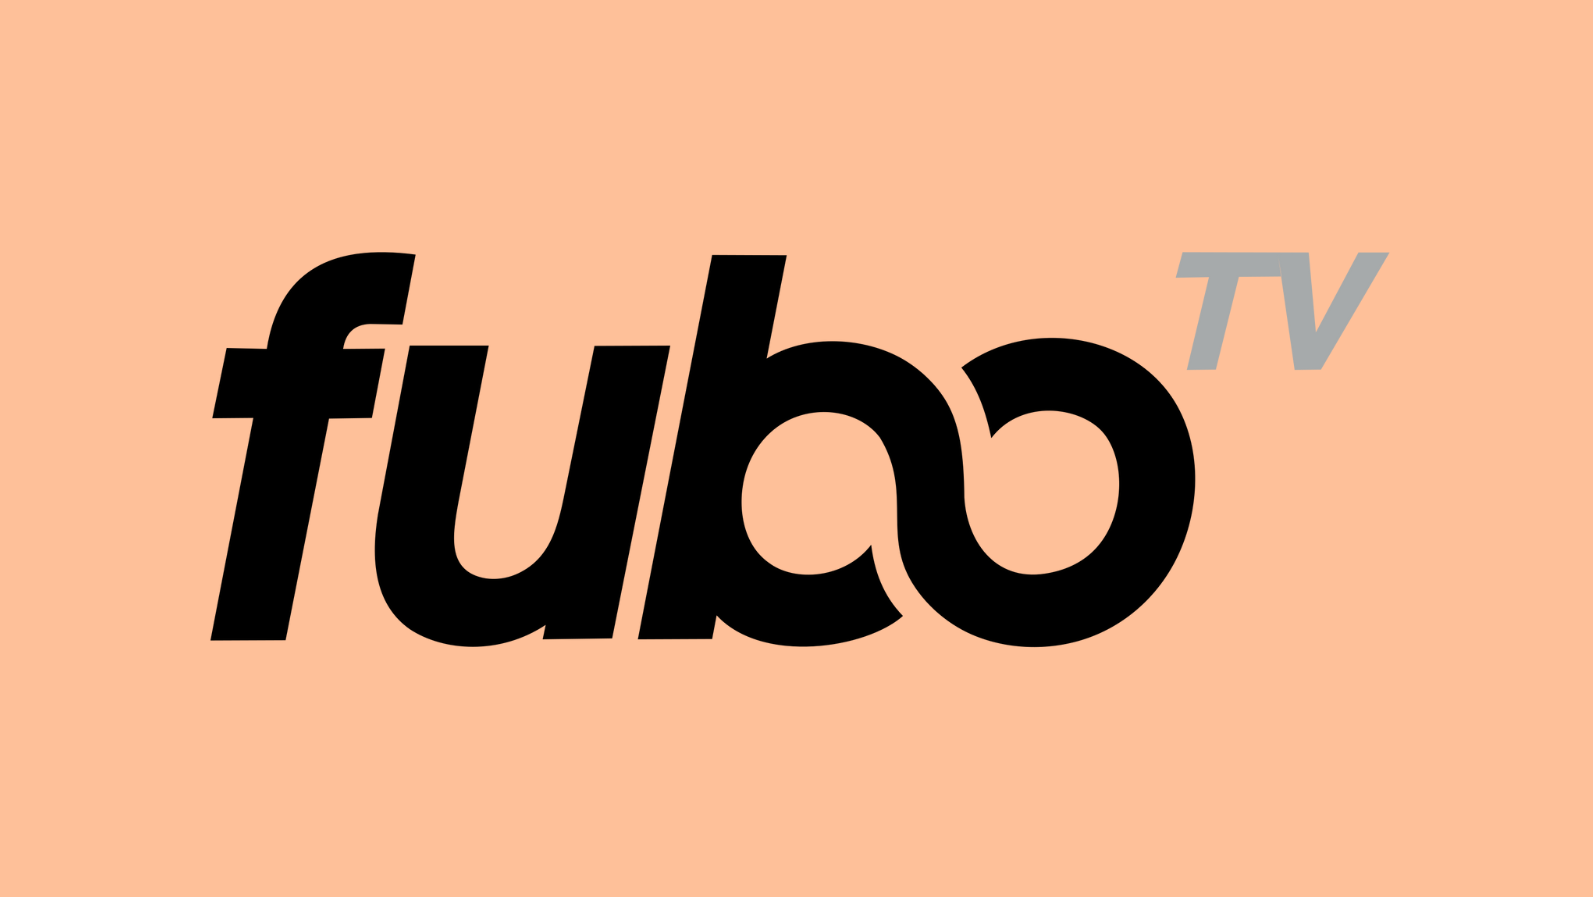 Sports fans can also check out Fubo TV, which supports up to three different computer streams.